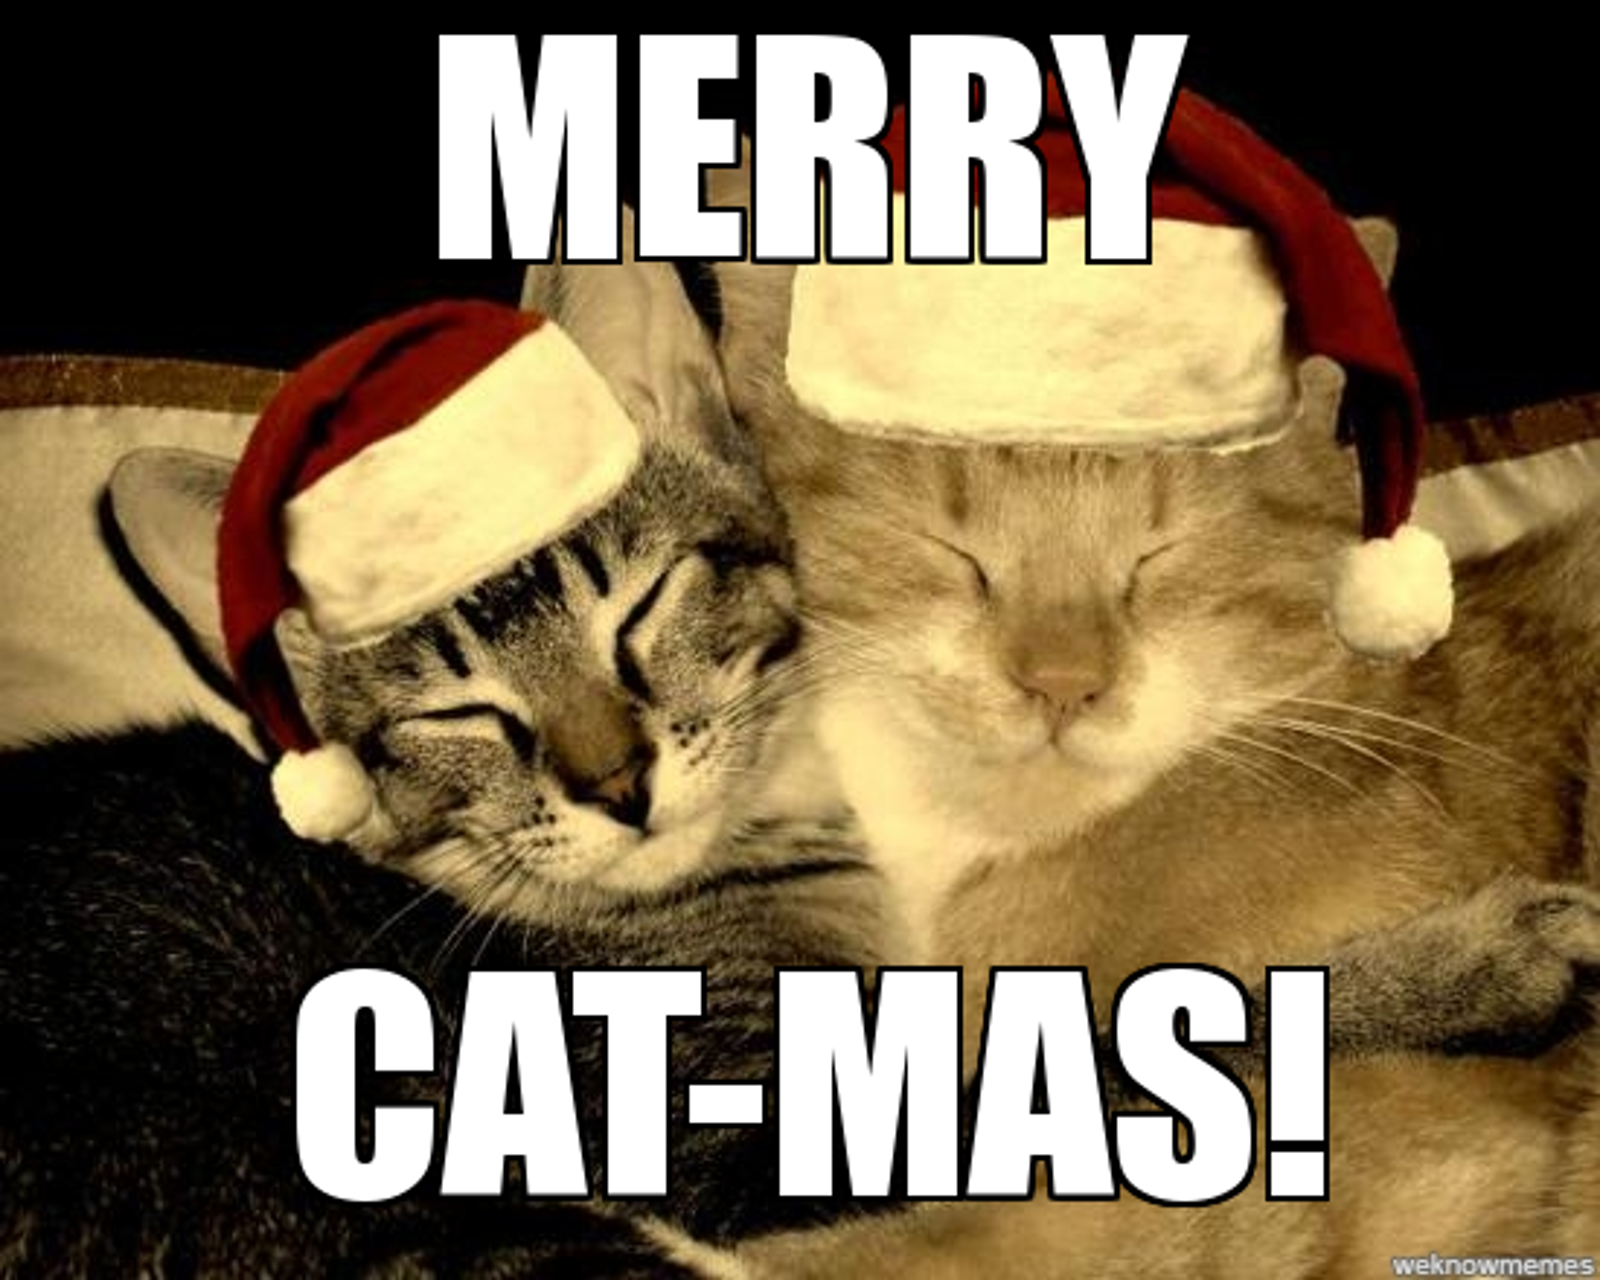 5 Cat-Tastic Videos Just in Time for Christmas